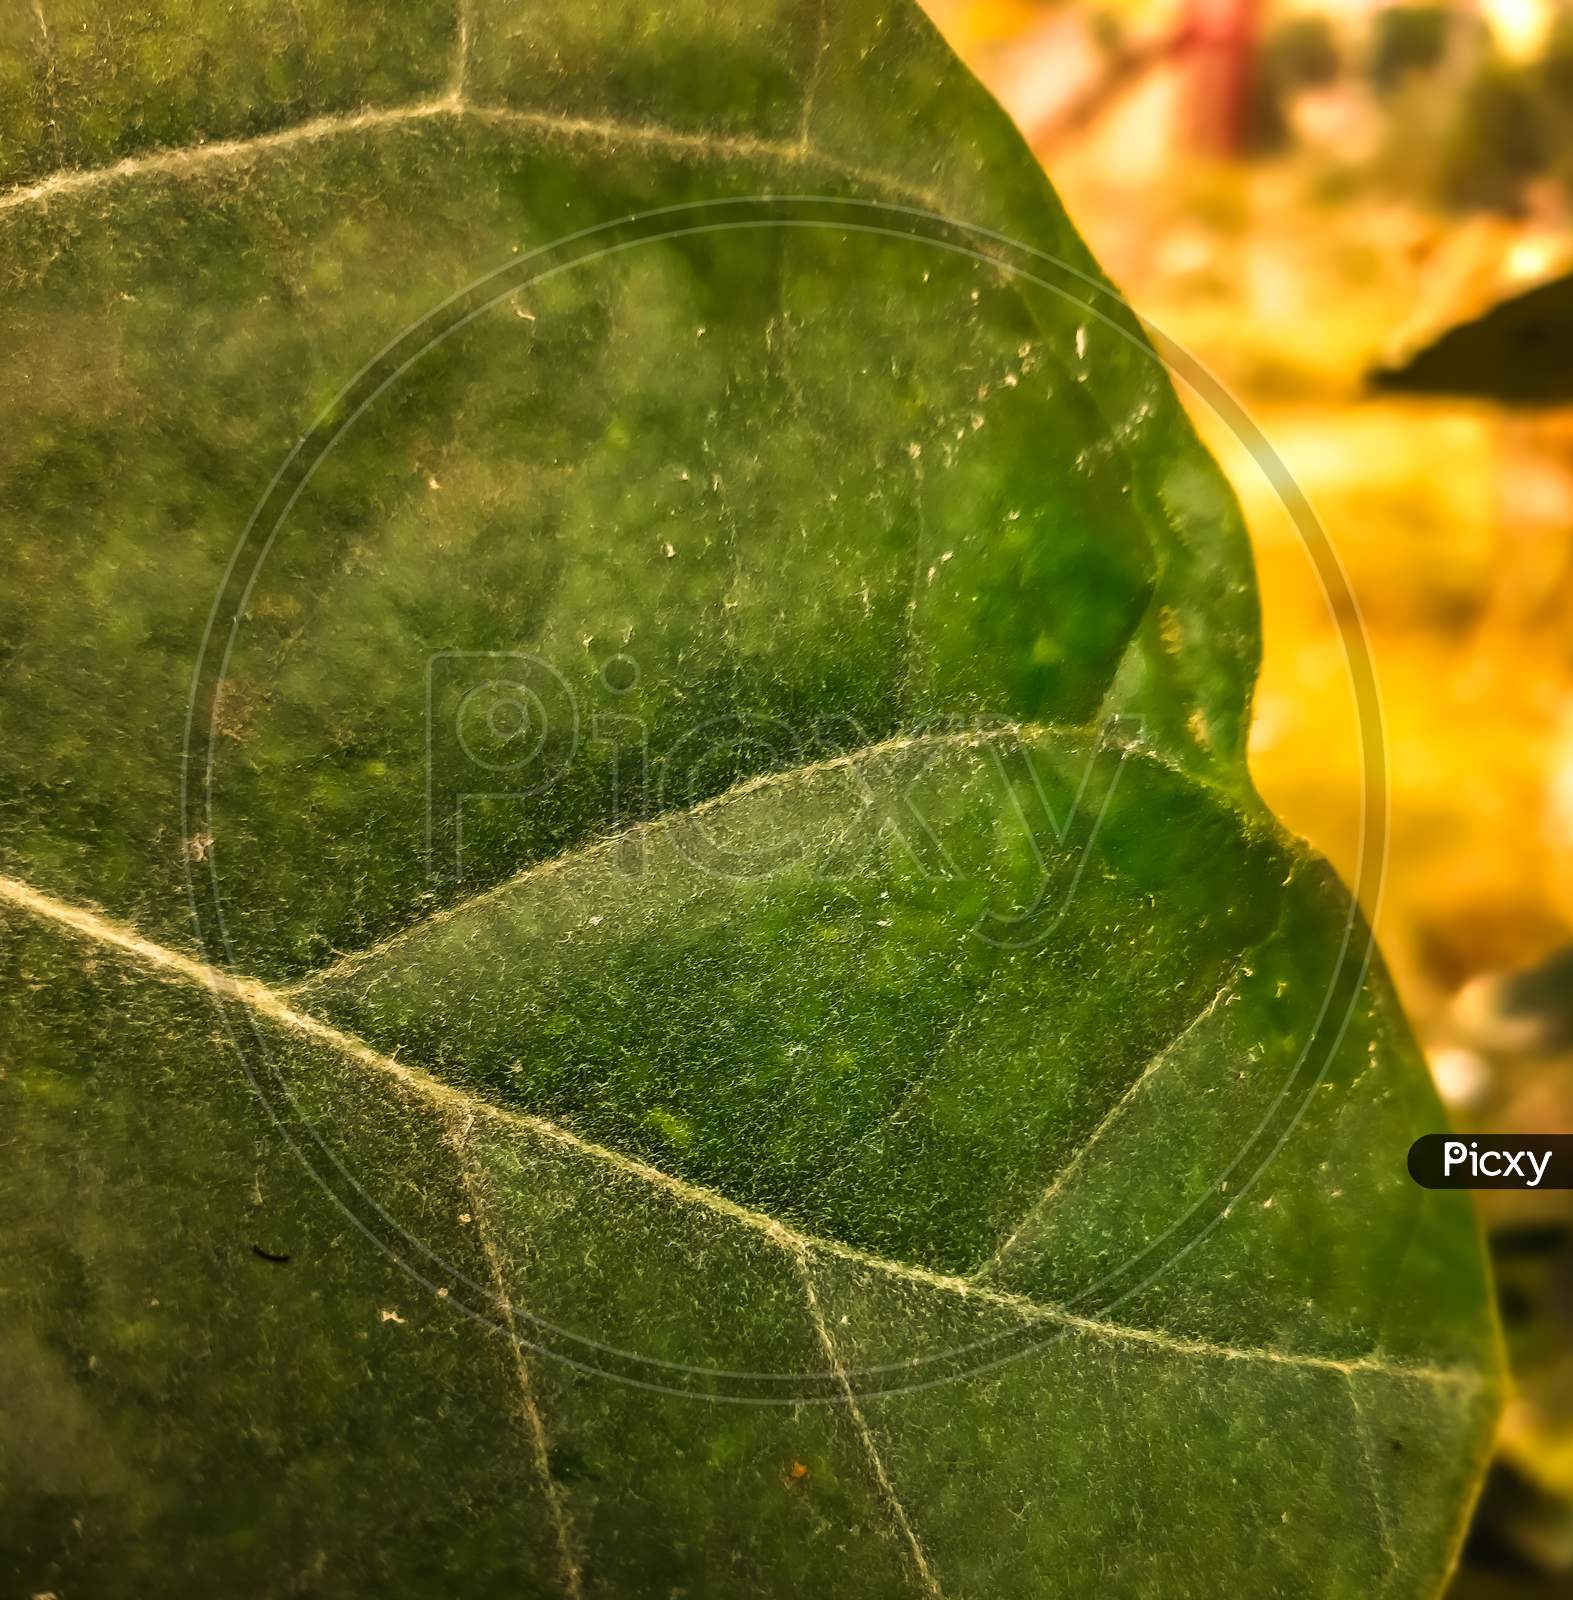 A Leaf Is The Principal Lateral Appendage Of The Vascular Plant Stem